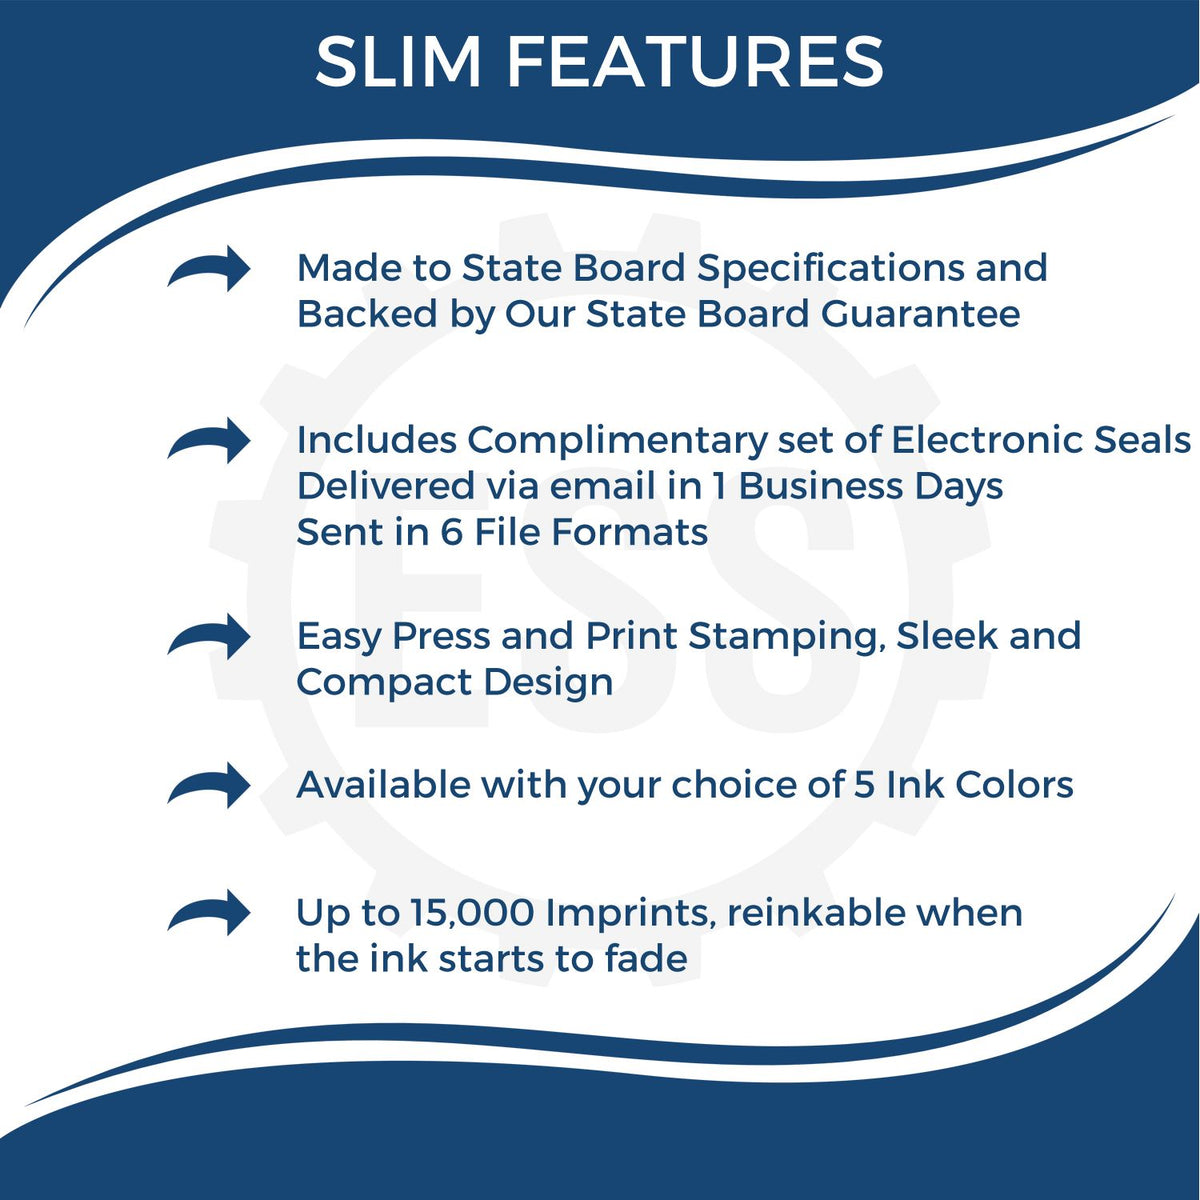 A picture of an infographic highlighting the selling points for the Super Slim Mississippi Notary Public Stamp